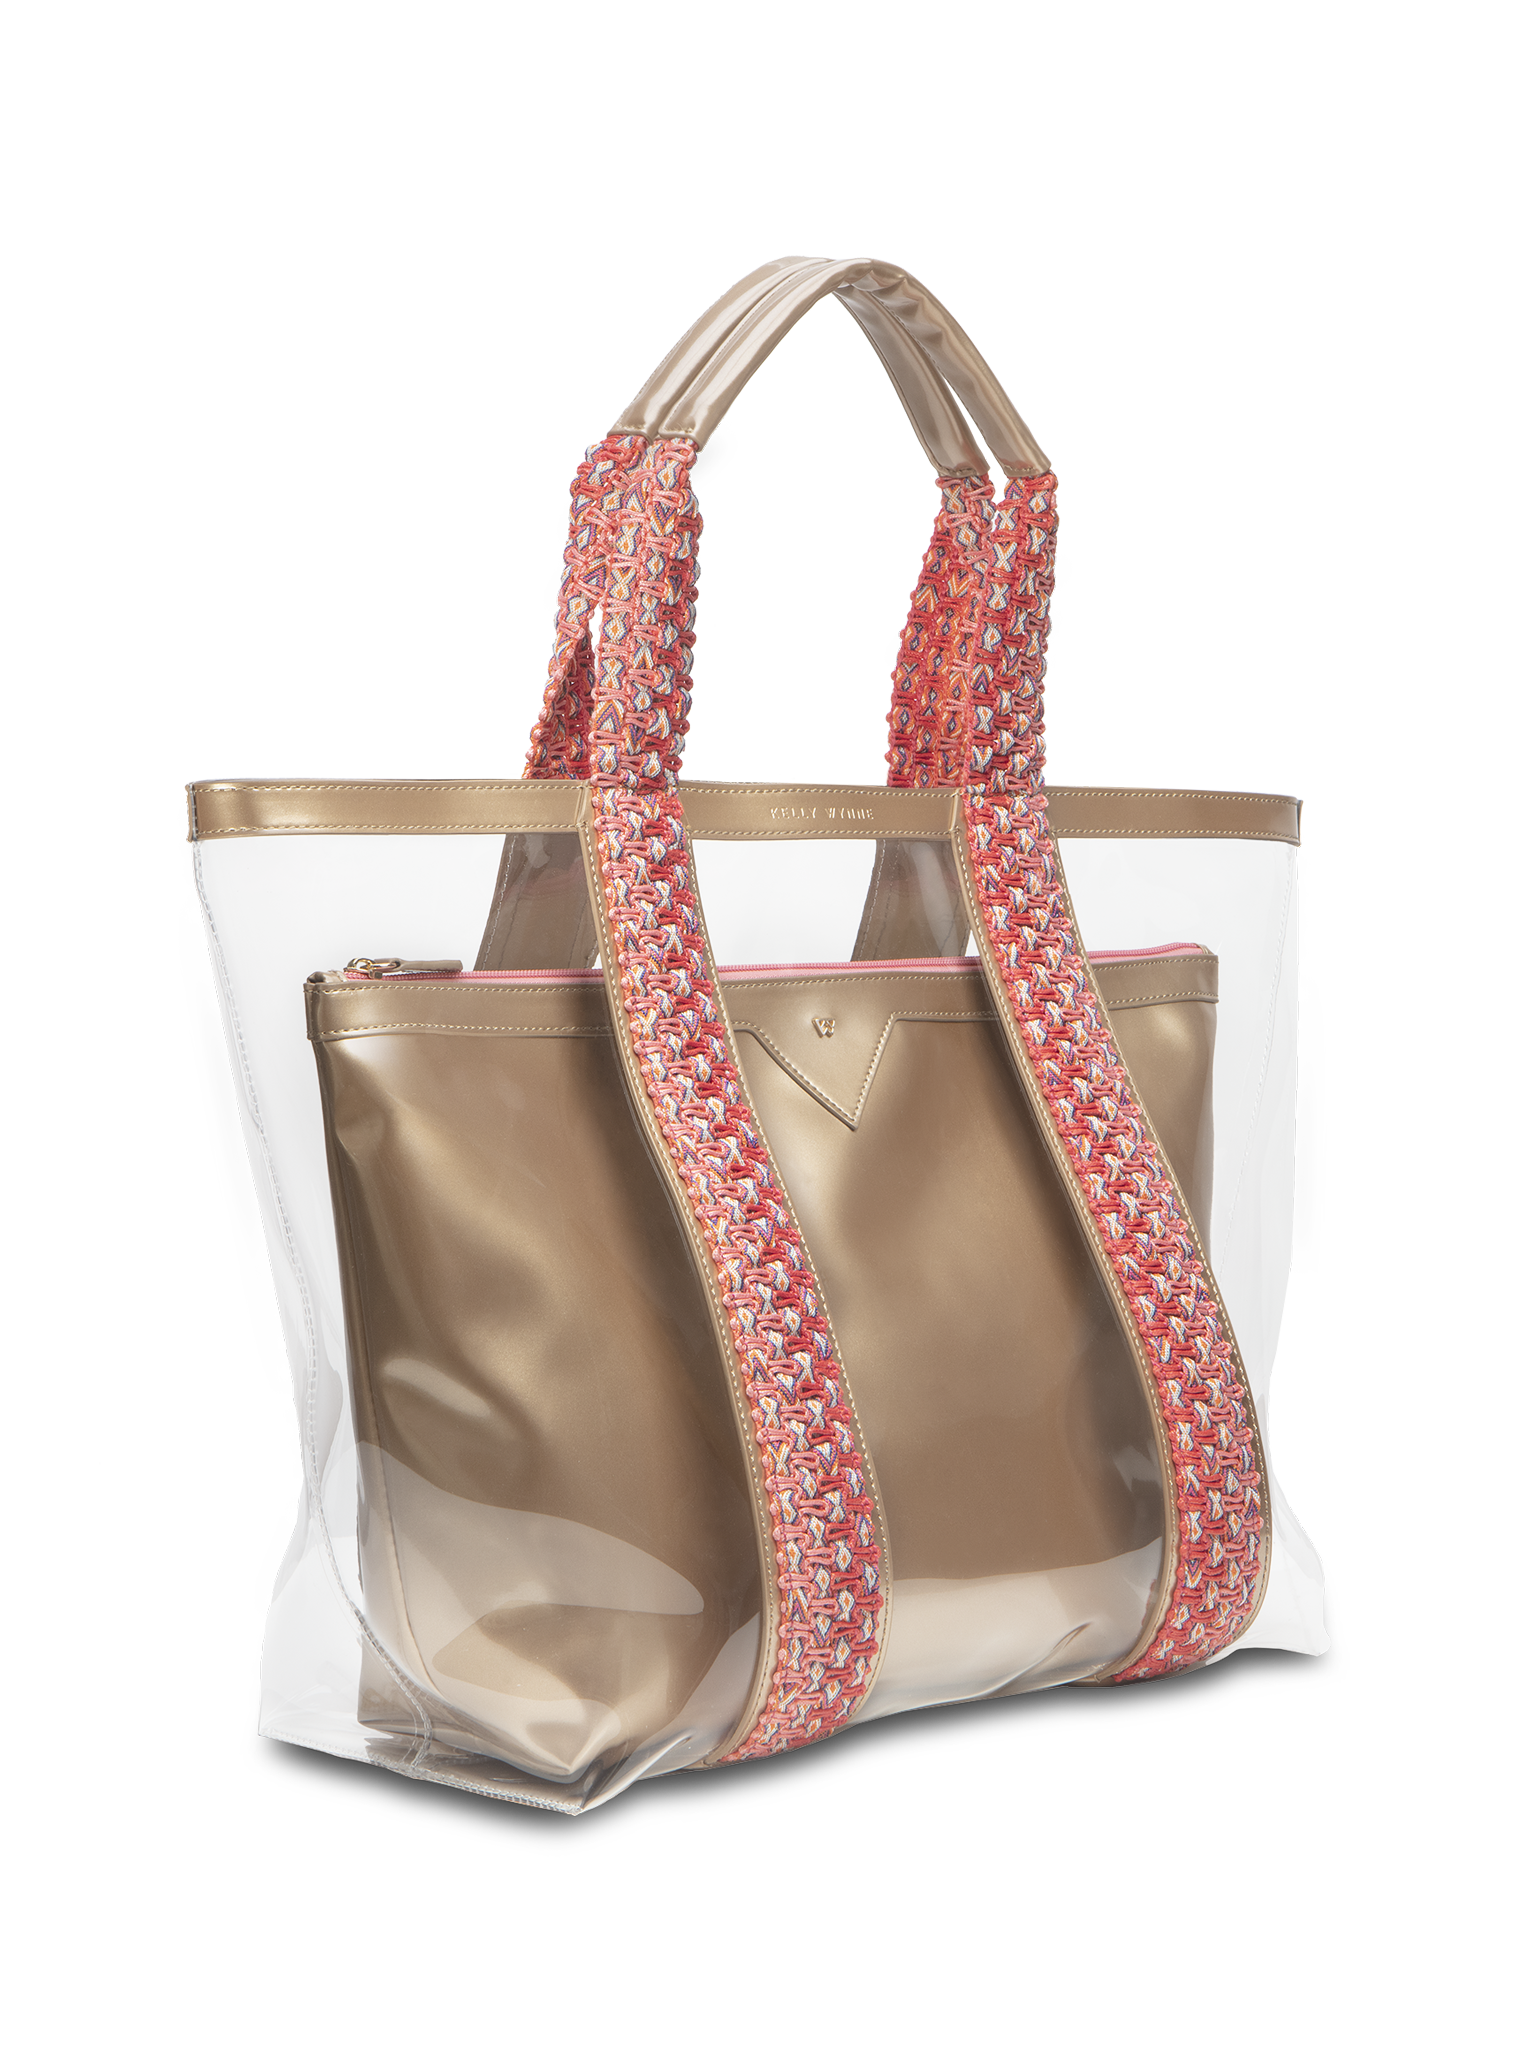 Clear exterior tote large enough to pack all your summer essentials. Waterproof material to make cleaning a breeze. Removable interior pouch made with water resistant vegan leather in champagne gold color 